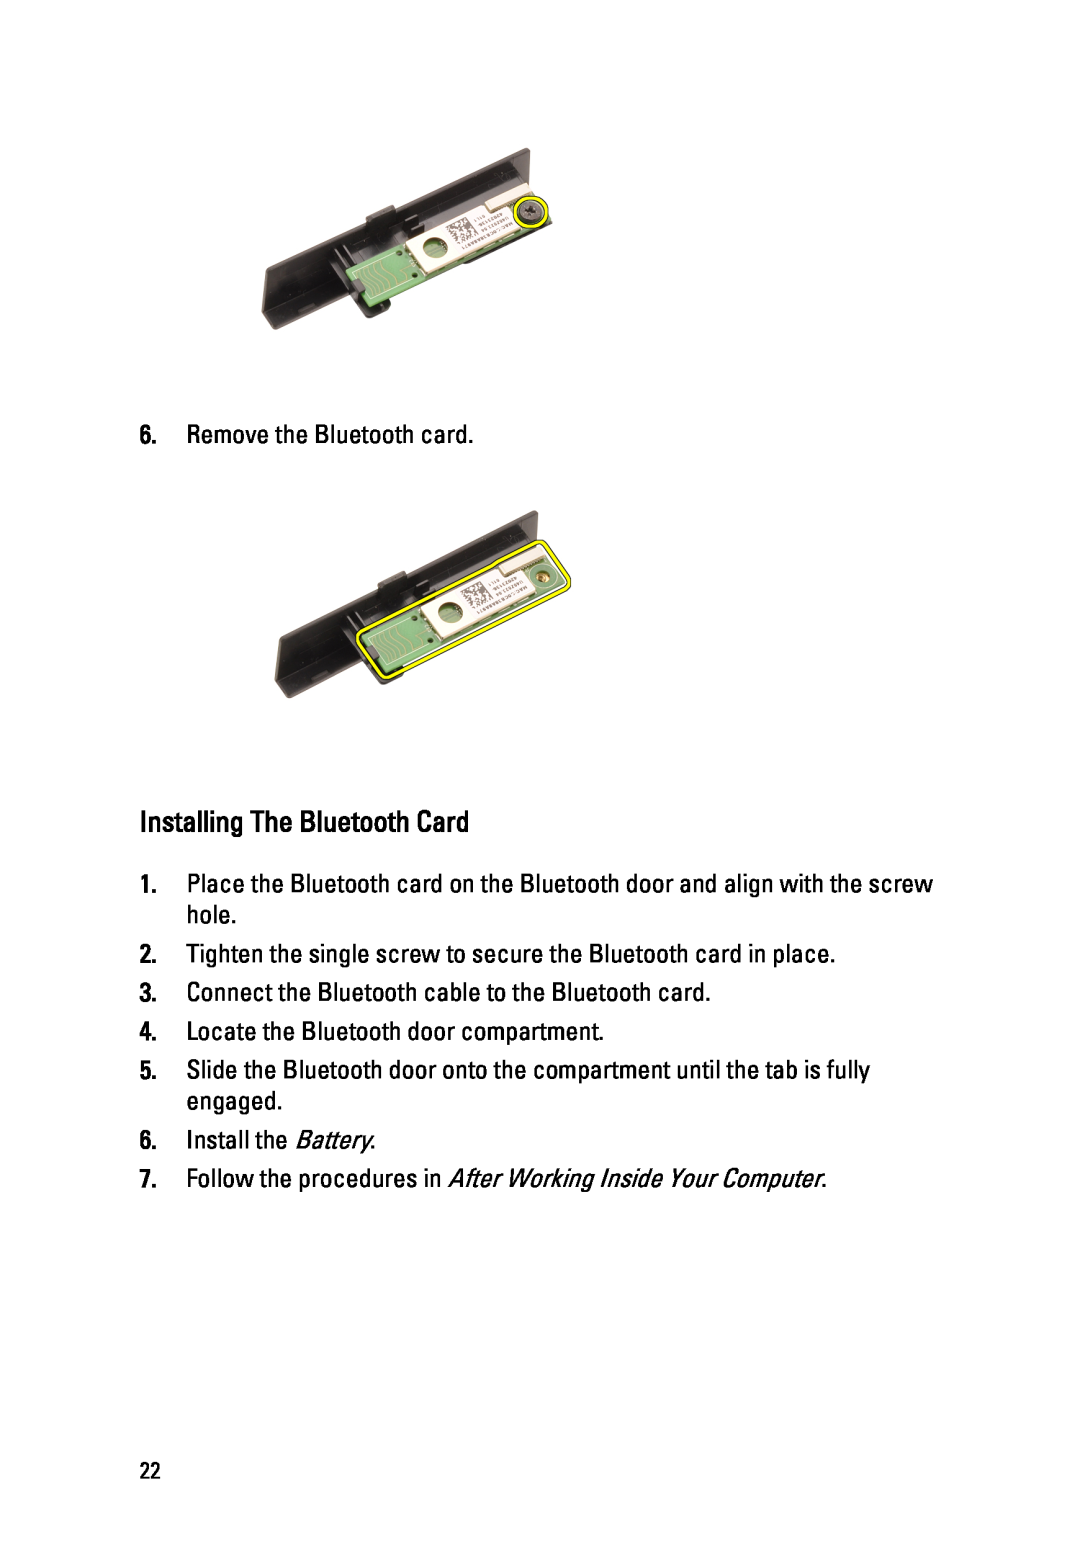 Dell M4600 owner manual Installing The Bluetooth Card, Follow the procedures in After Working Inside Your Computer 